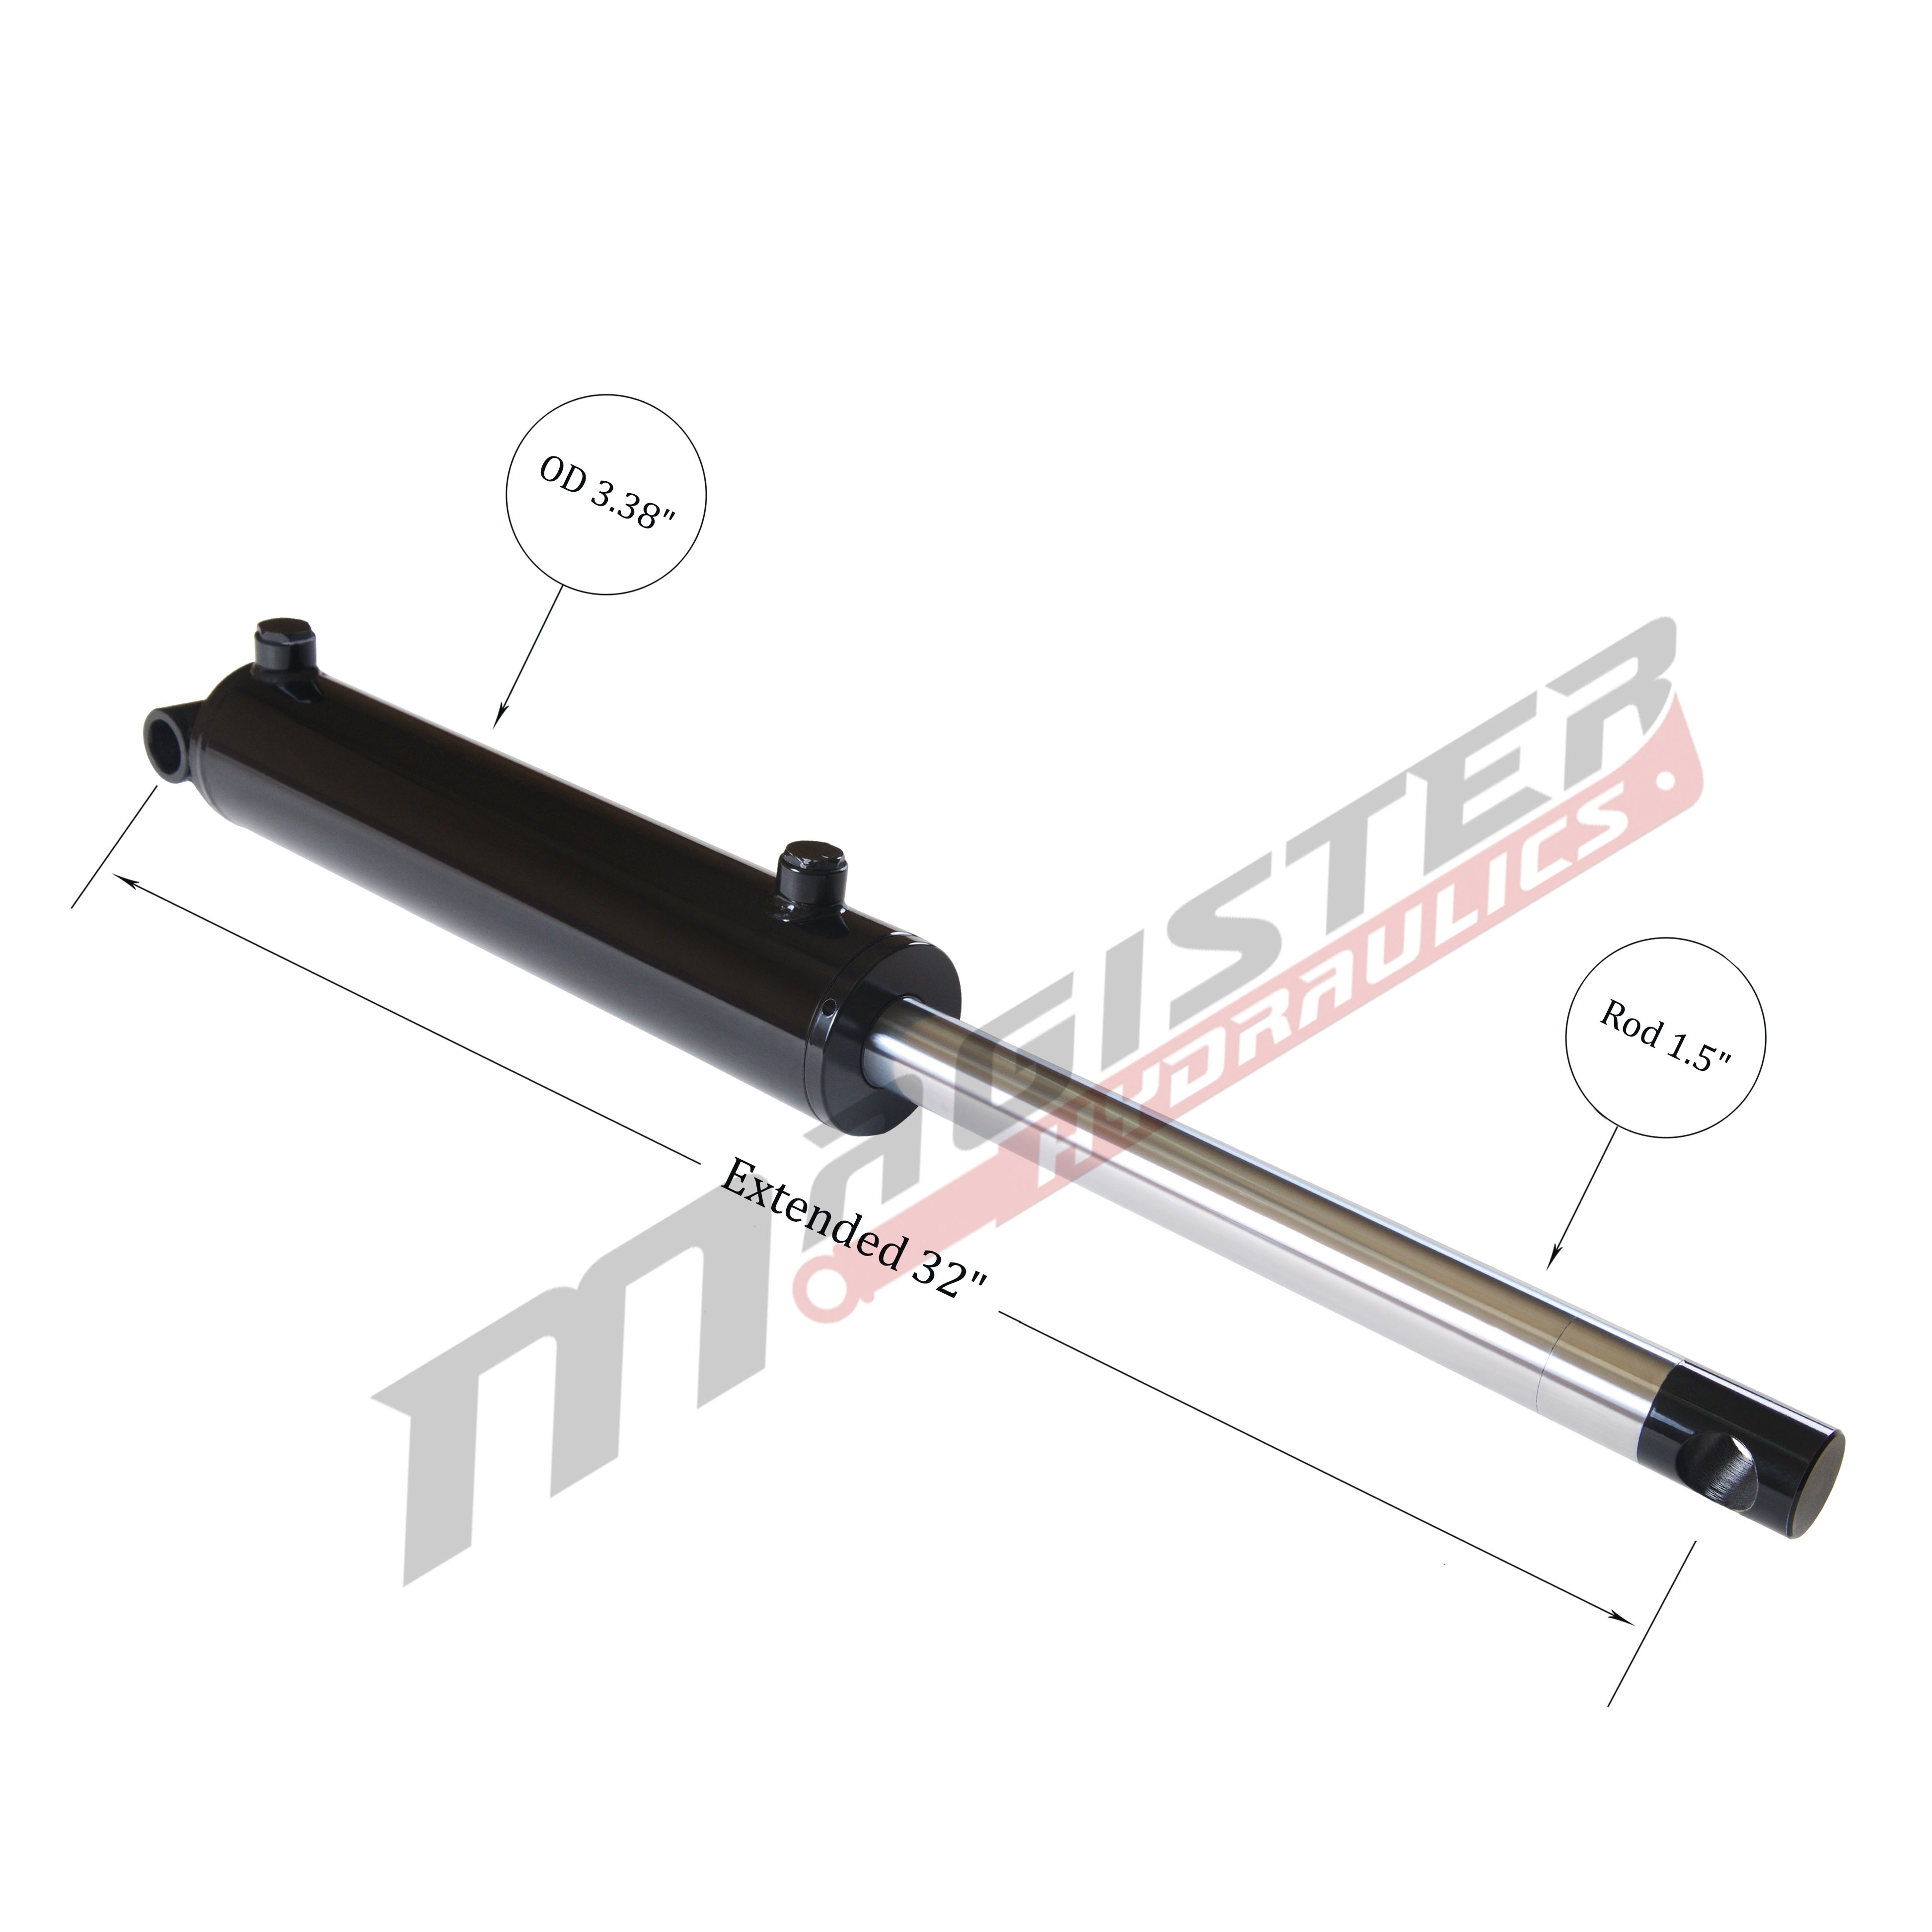 3 bore x 12 stroke hydraulic cylinder, welded pin eye double acting cylinder | Magister Hydraulics